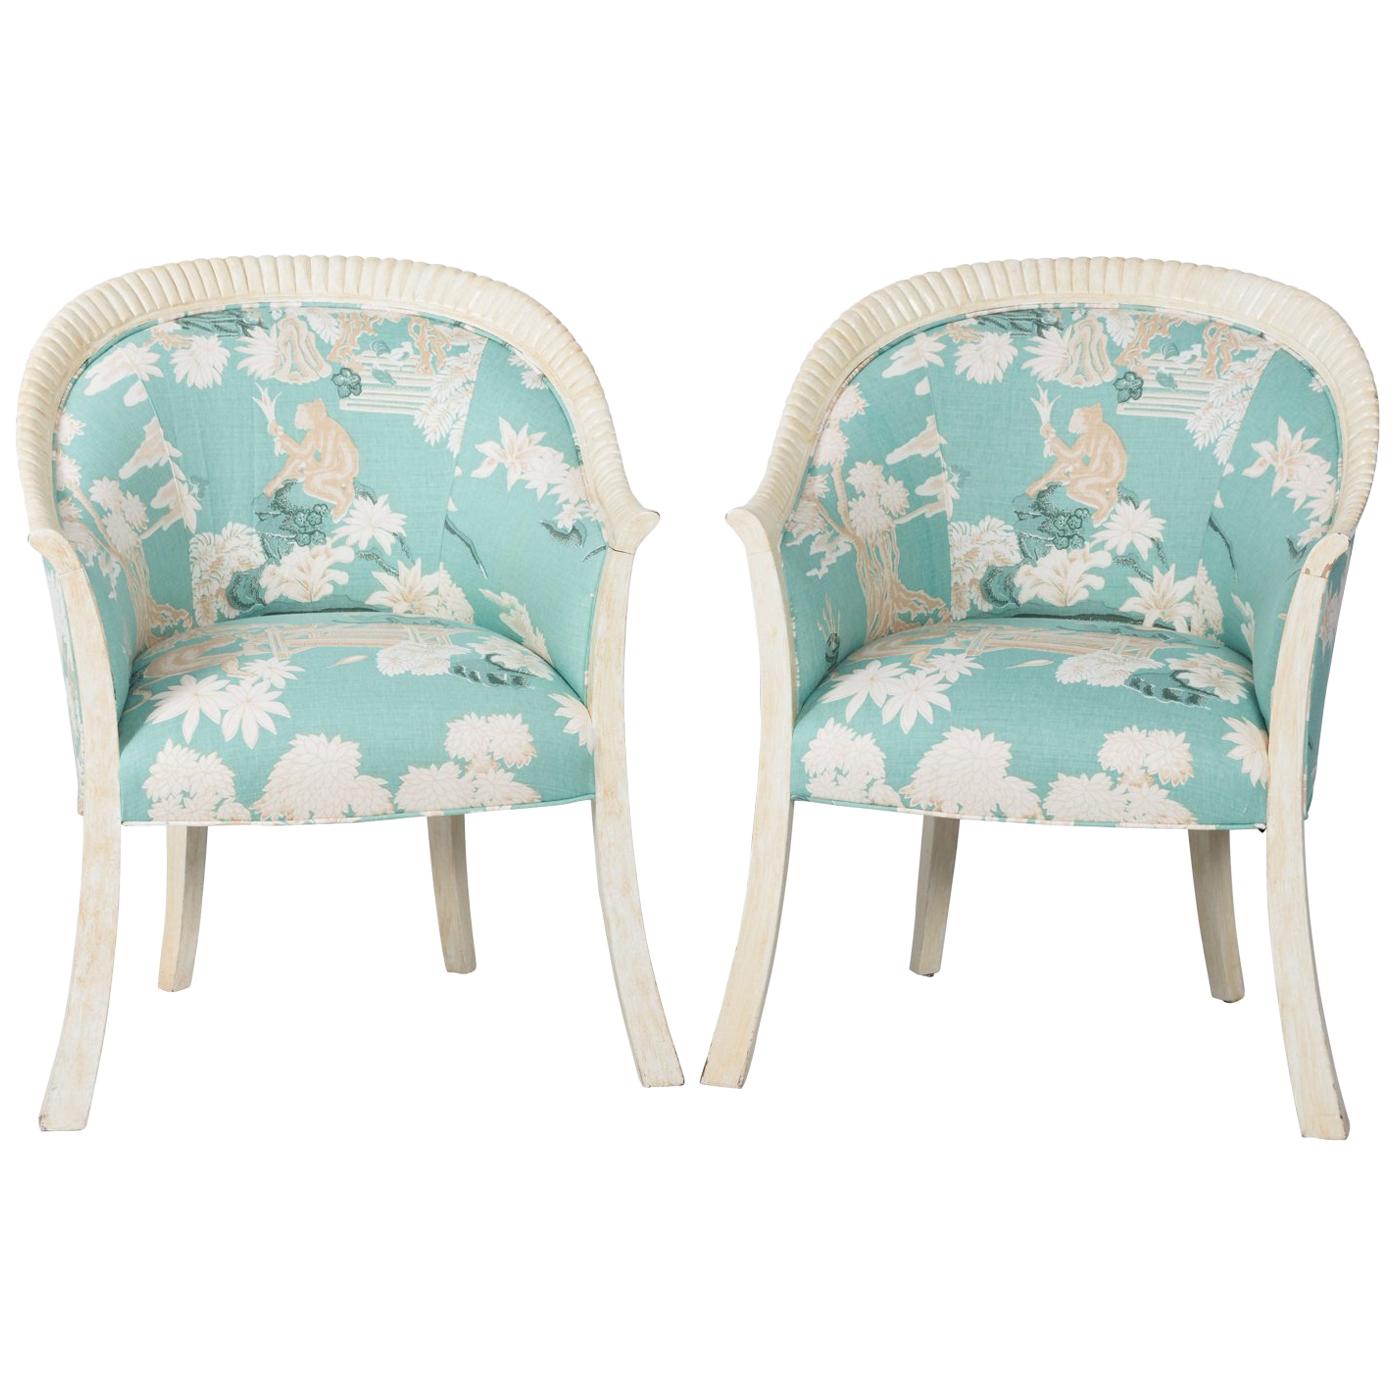 Pair of Upholstered Chinoiserie Armchairs